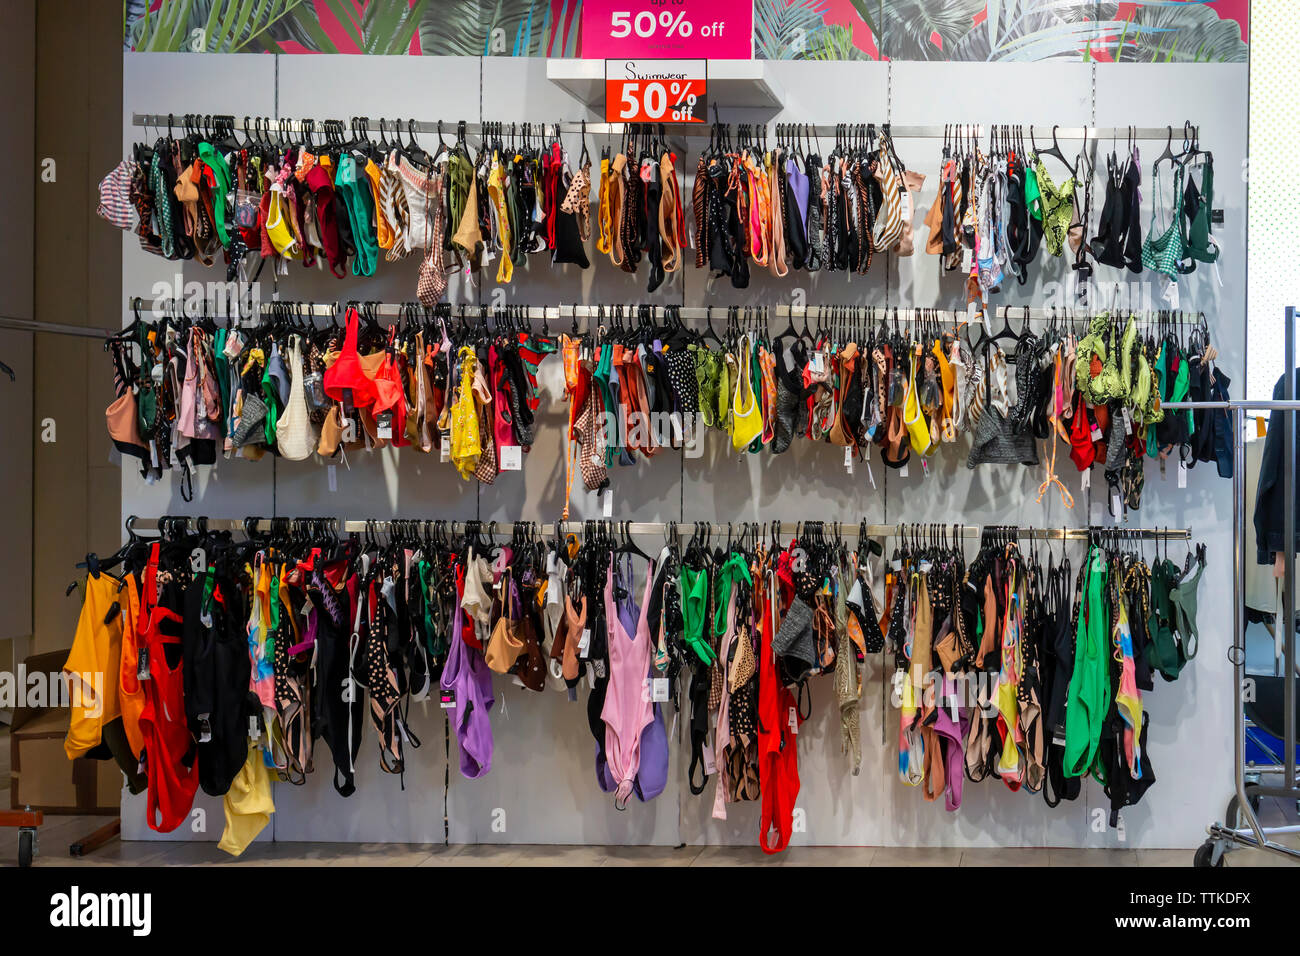 Swimwear on sale at the TopShop/TopMan store on Fifth Avenue in New York on  Thursday,